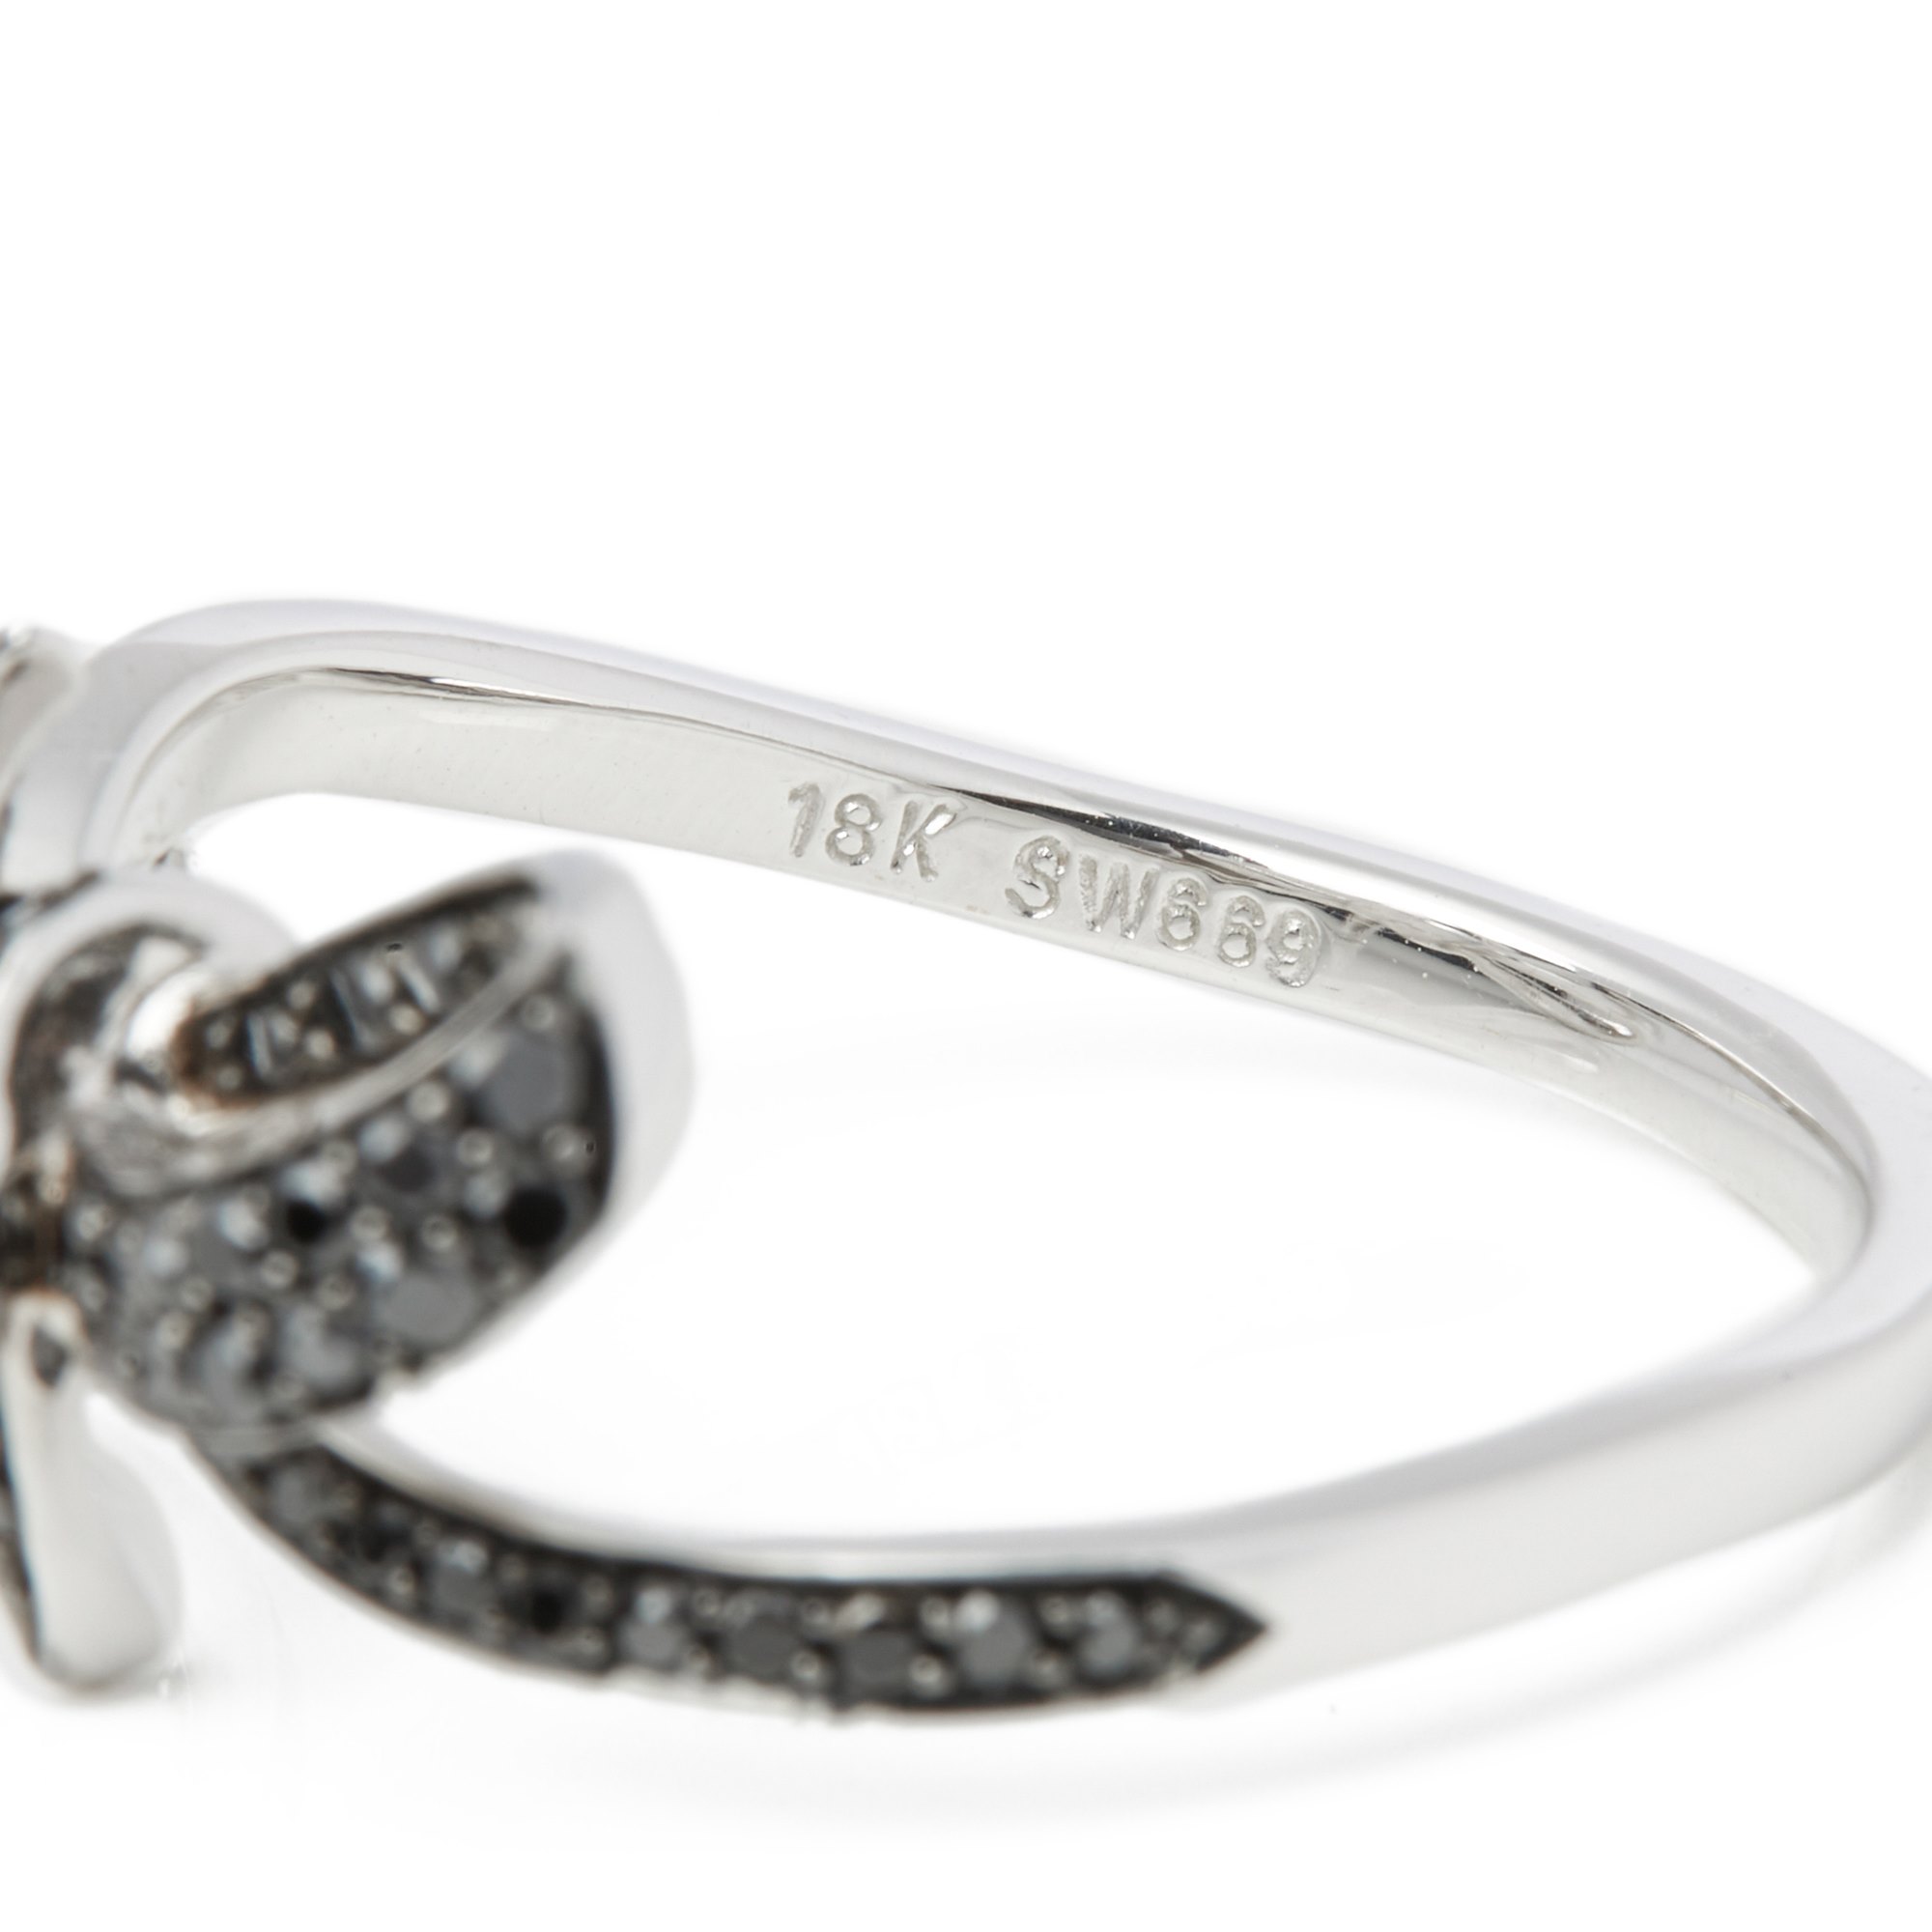 Stephen Webster Forget Me Knot 18ct White Gold Black Diamond Small Bow Ring